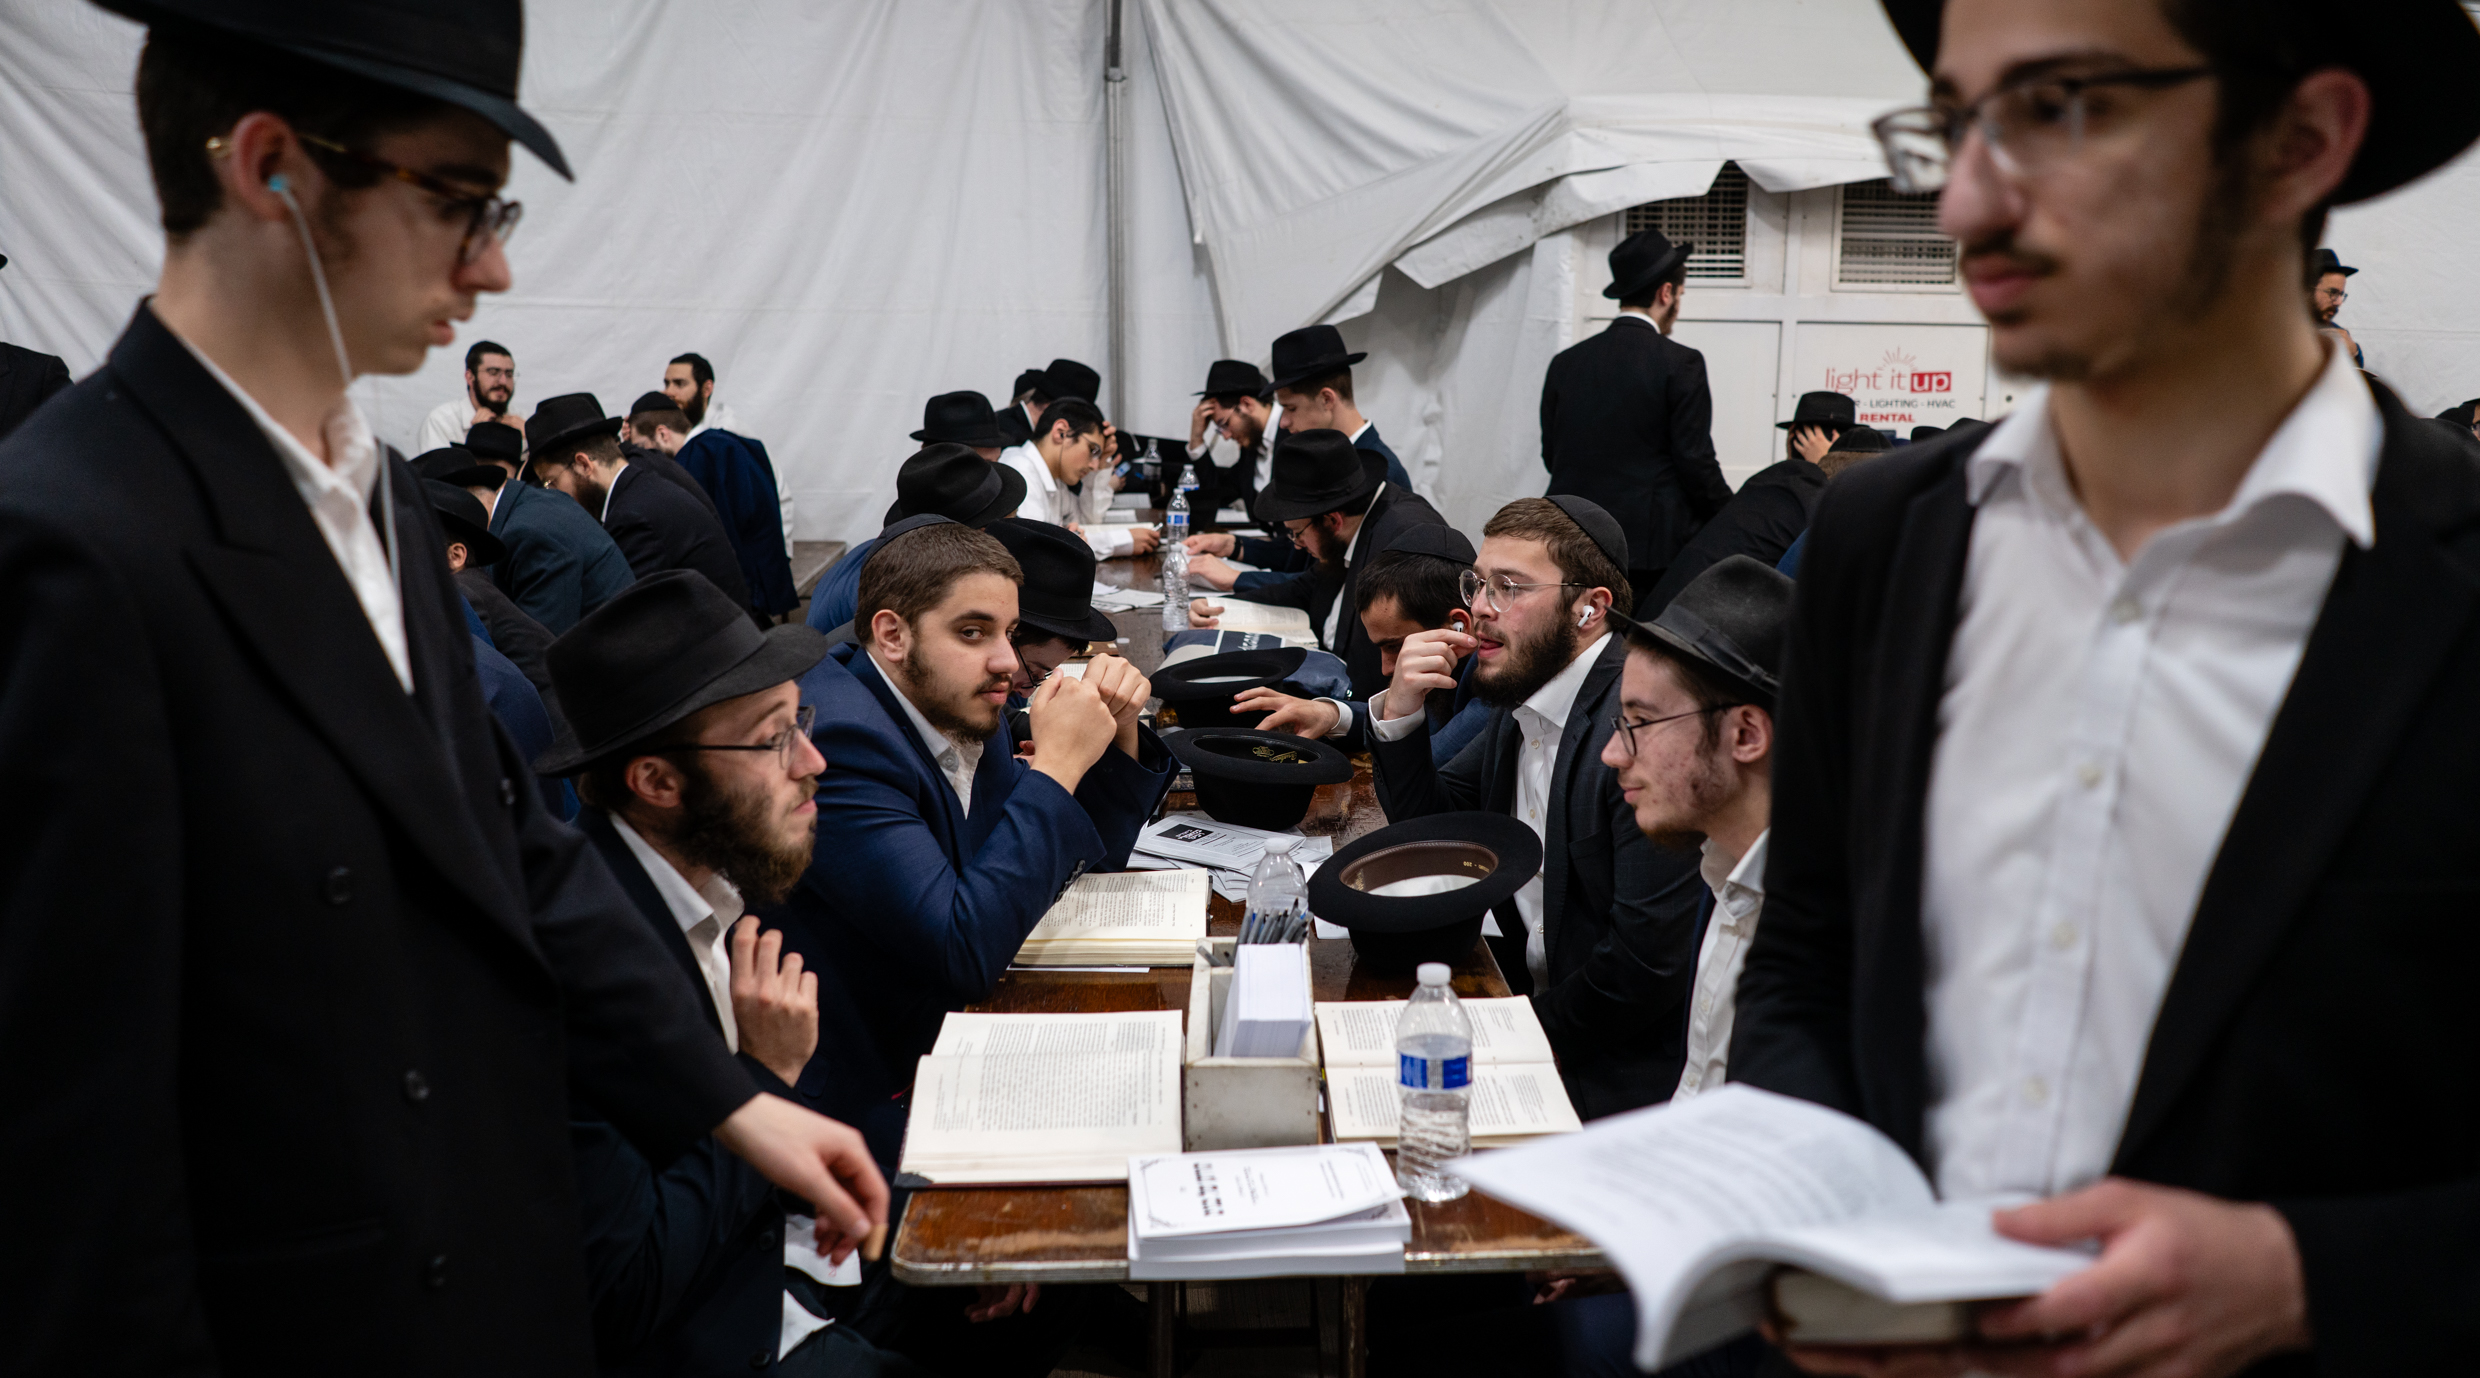 Preparing to visit the resting place of Rabbi Menachem Mendel Schneerson, the Lubavitcher rebbe, on the 30th anniversary of his passing, in Queens, July 8, 2024. (Luke Tress)